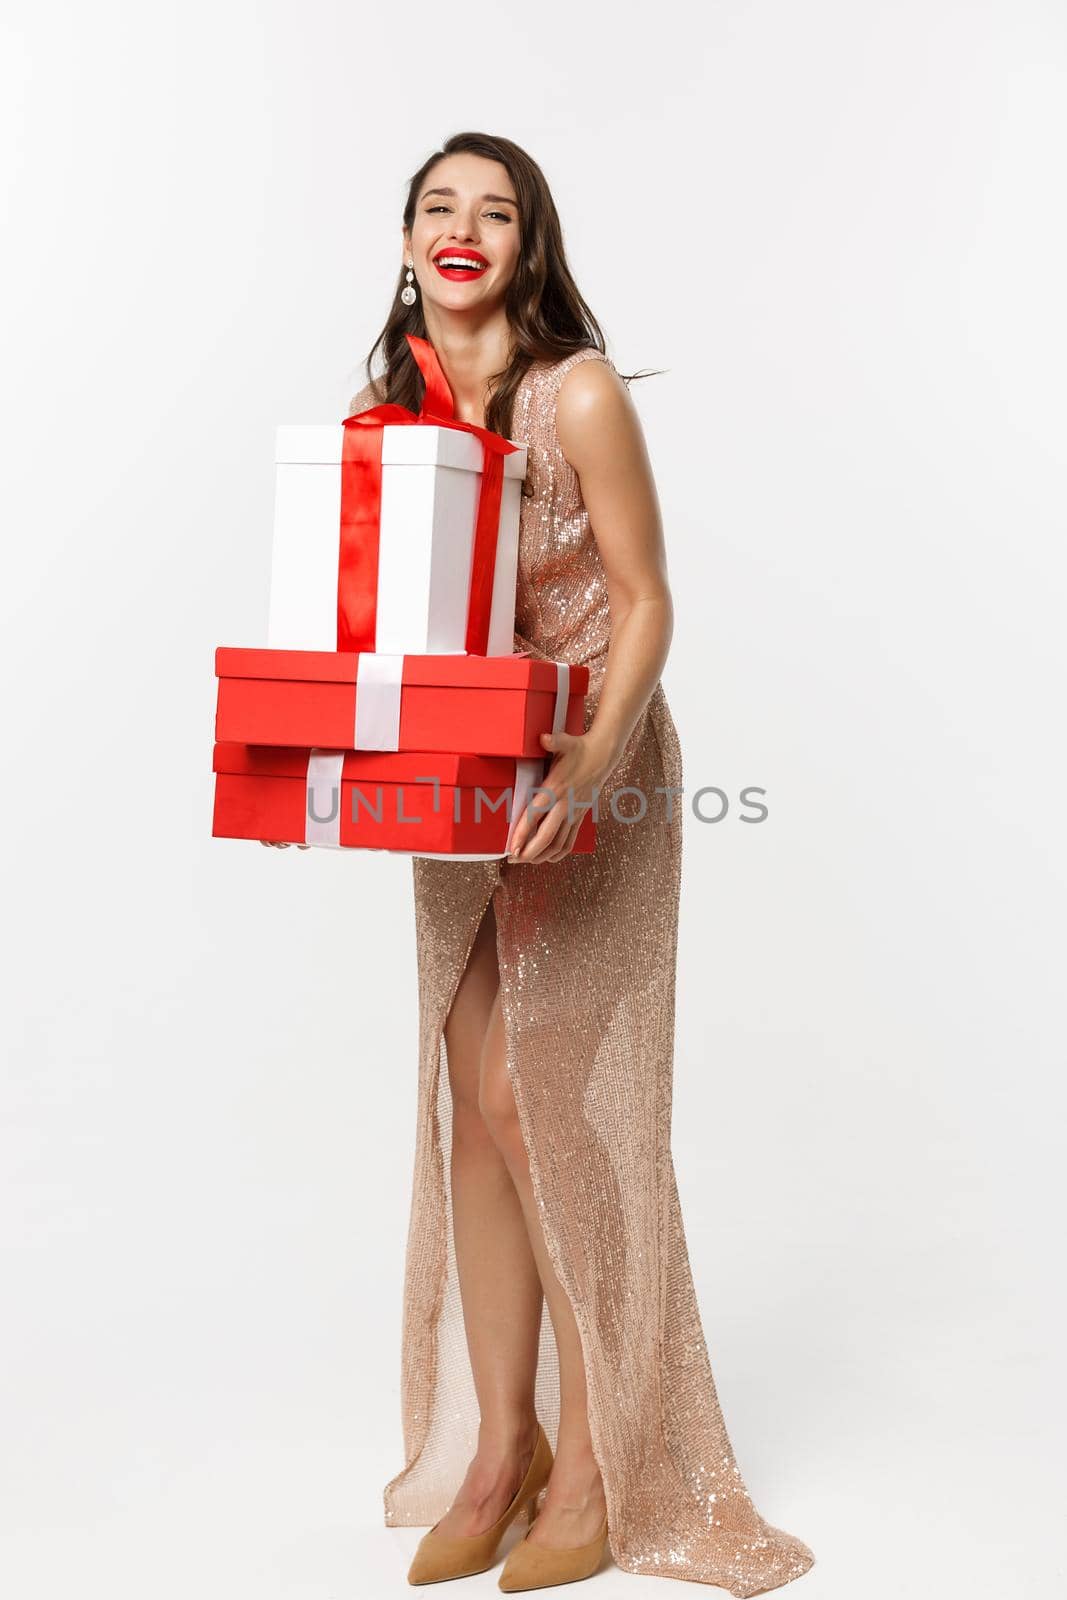 Party and celebration concept. Full-length of attractive brunette in glamour dress, holding Christmas gifts and laughing happy, white background.